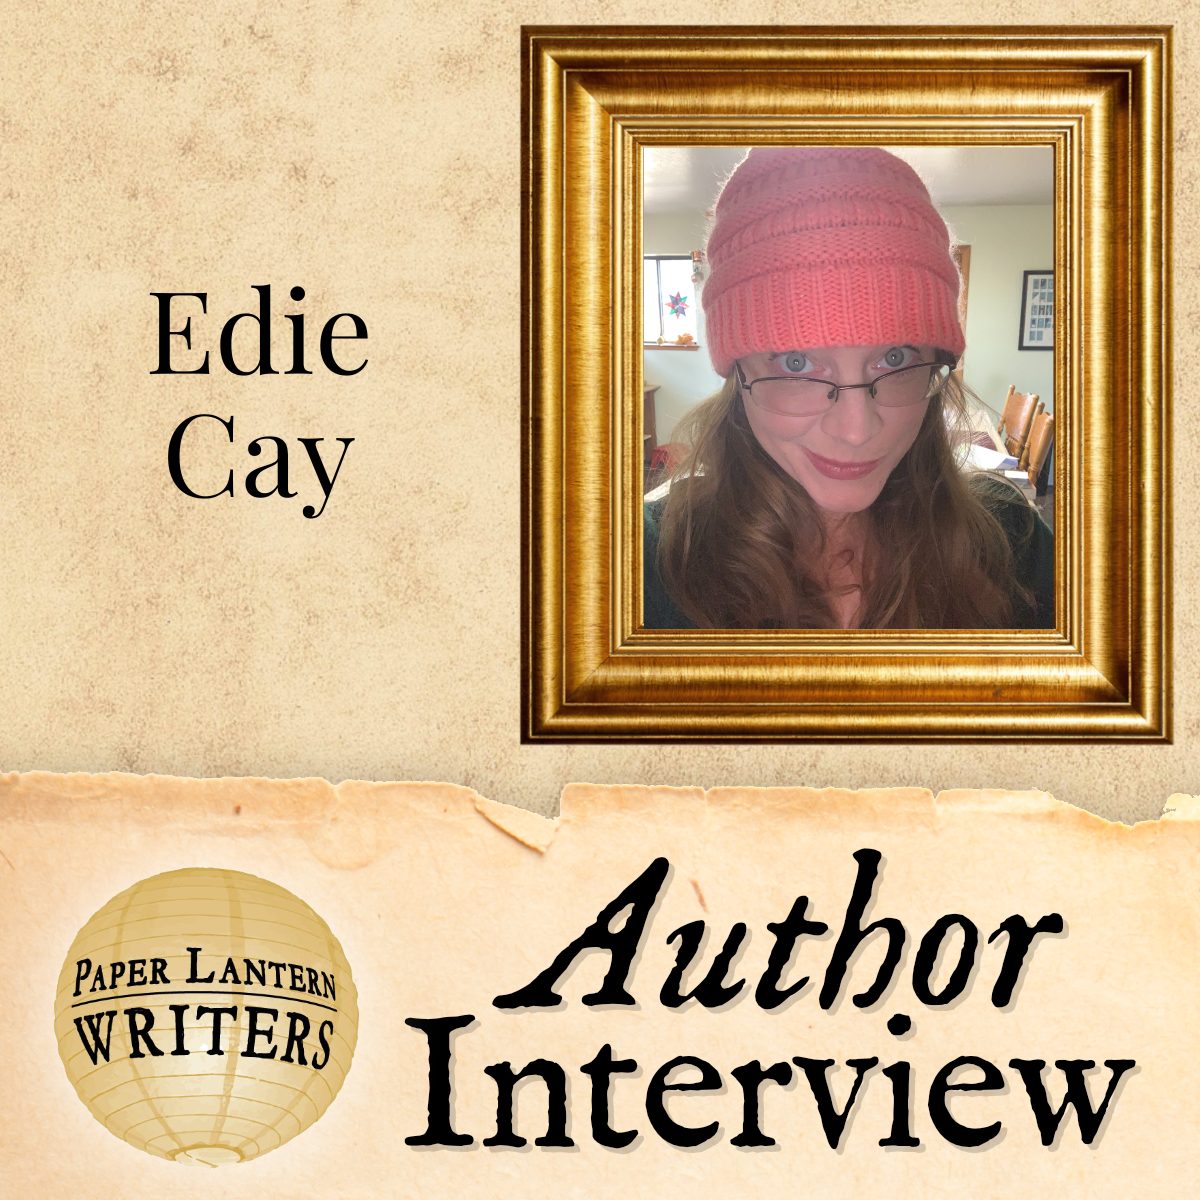 Interview with Paper Lantern Writer Edie Cay